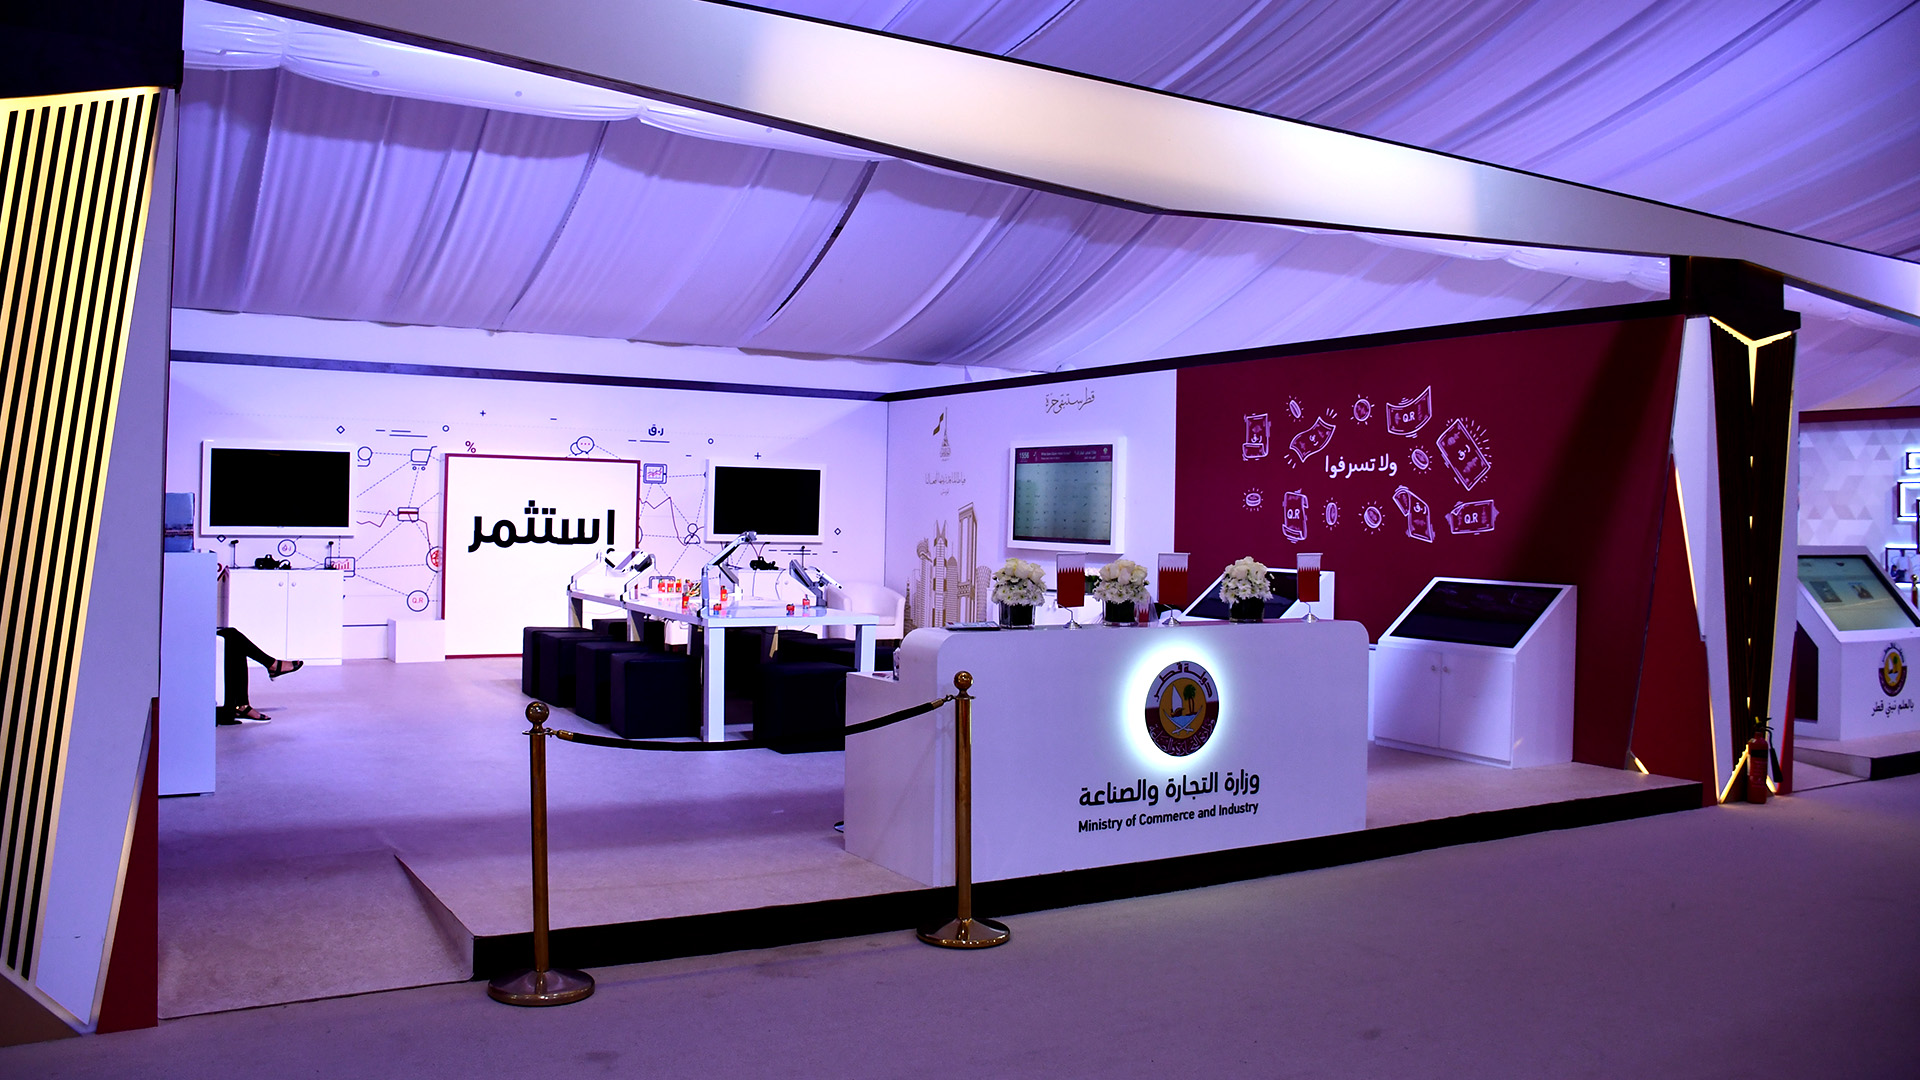 Exhibition Stand for Qatar's Ministry of Commerce and Industry at Darb Al Saai for National Day 2018 fabricated by ME Visual